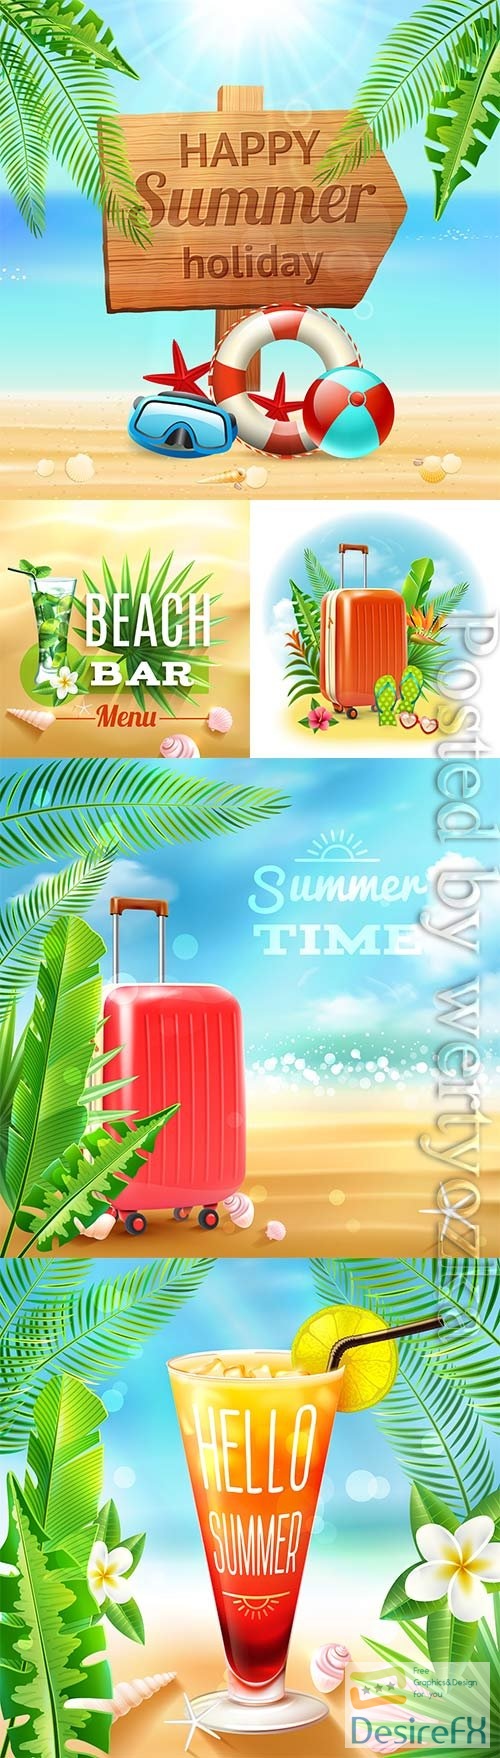 Summer vacation, sea, palm trees, cocktails in vector vol 6